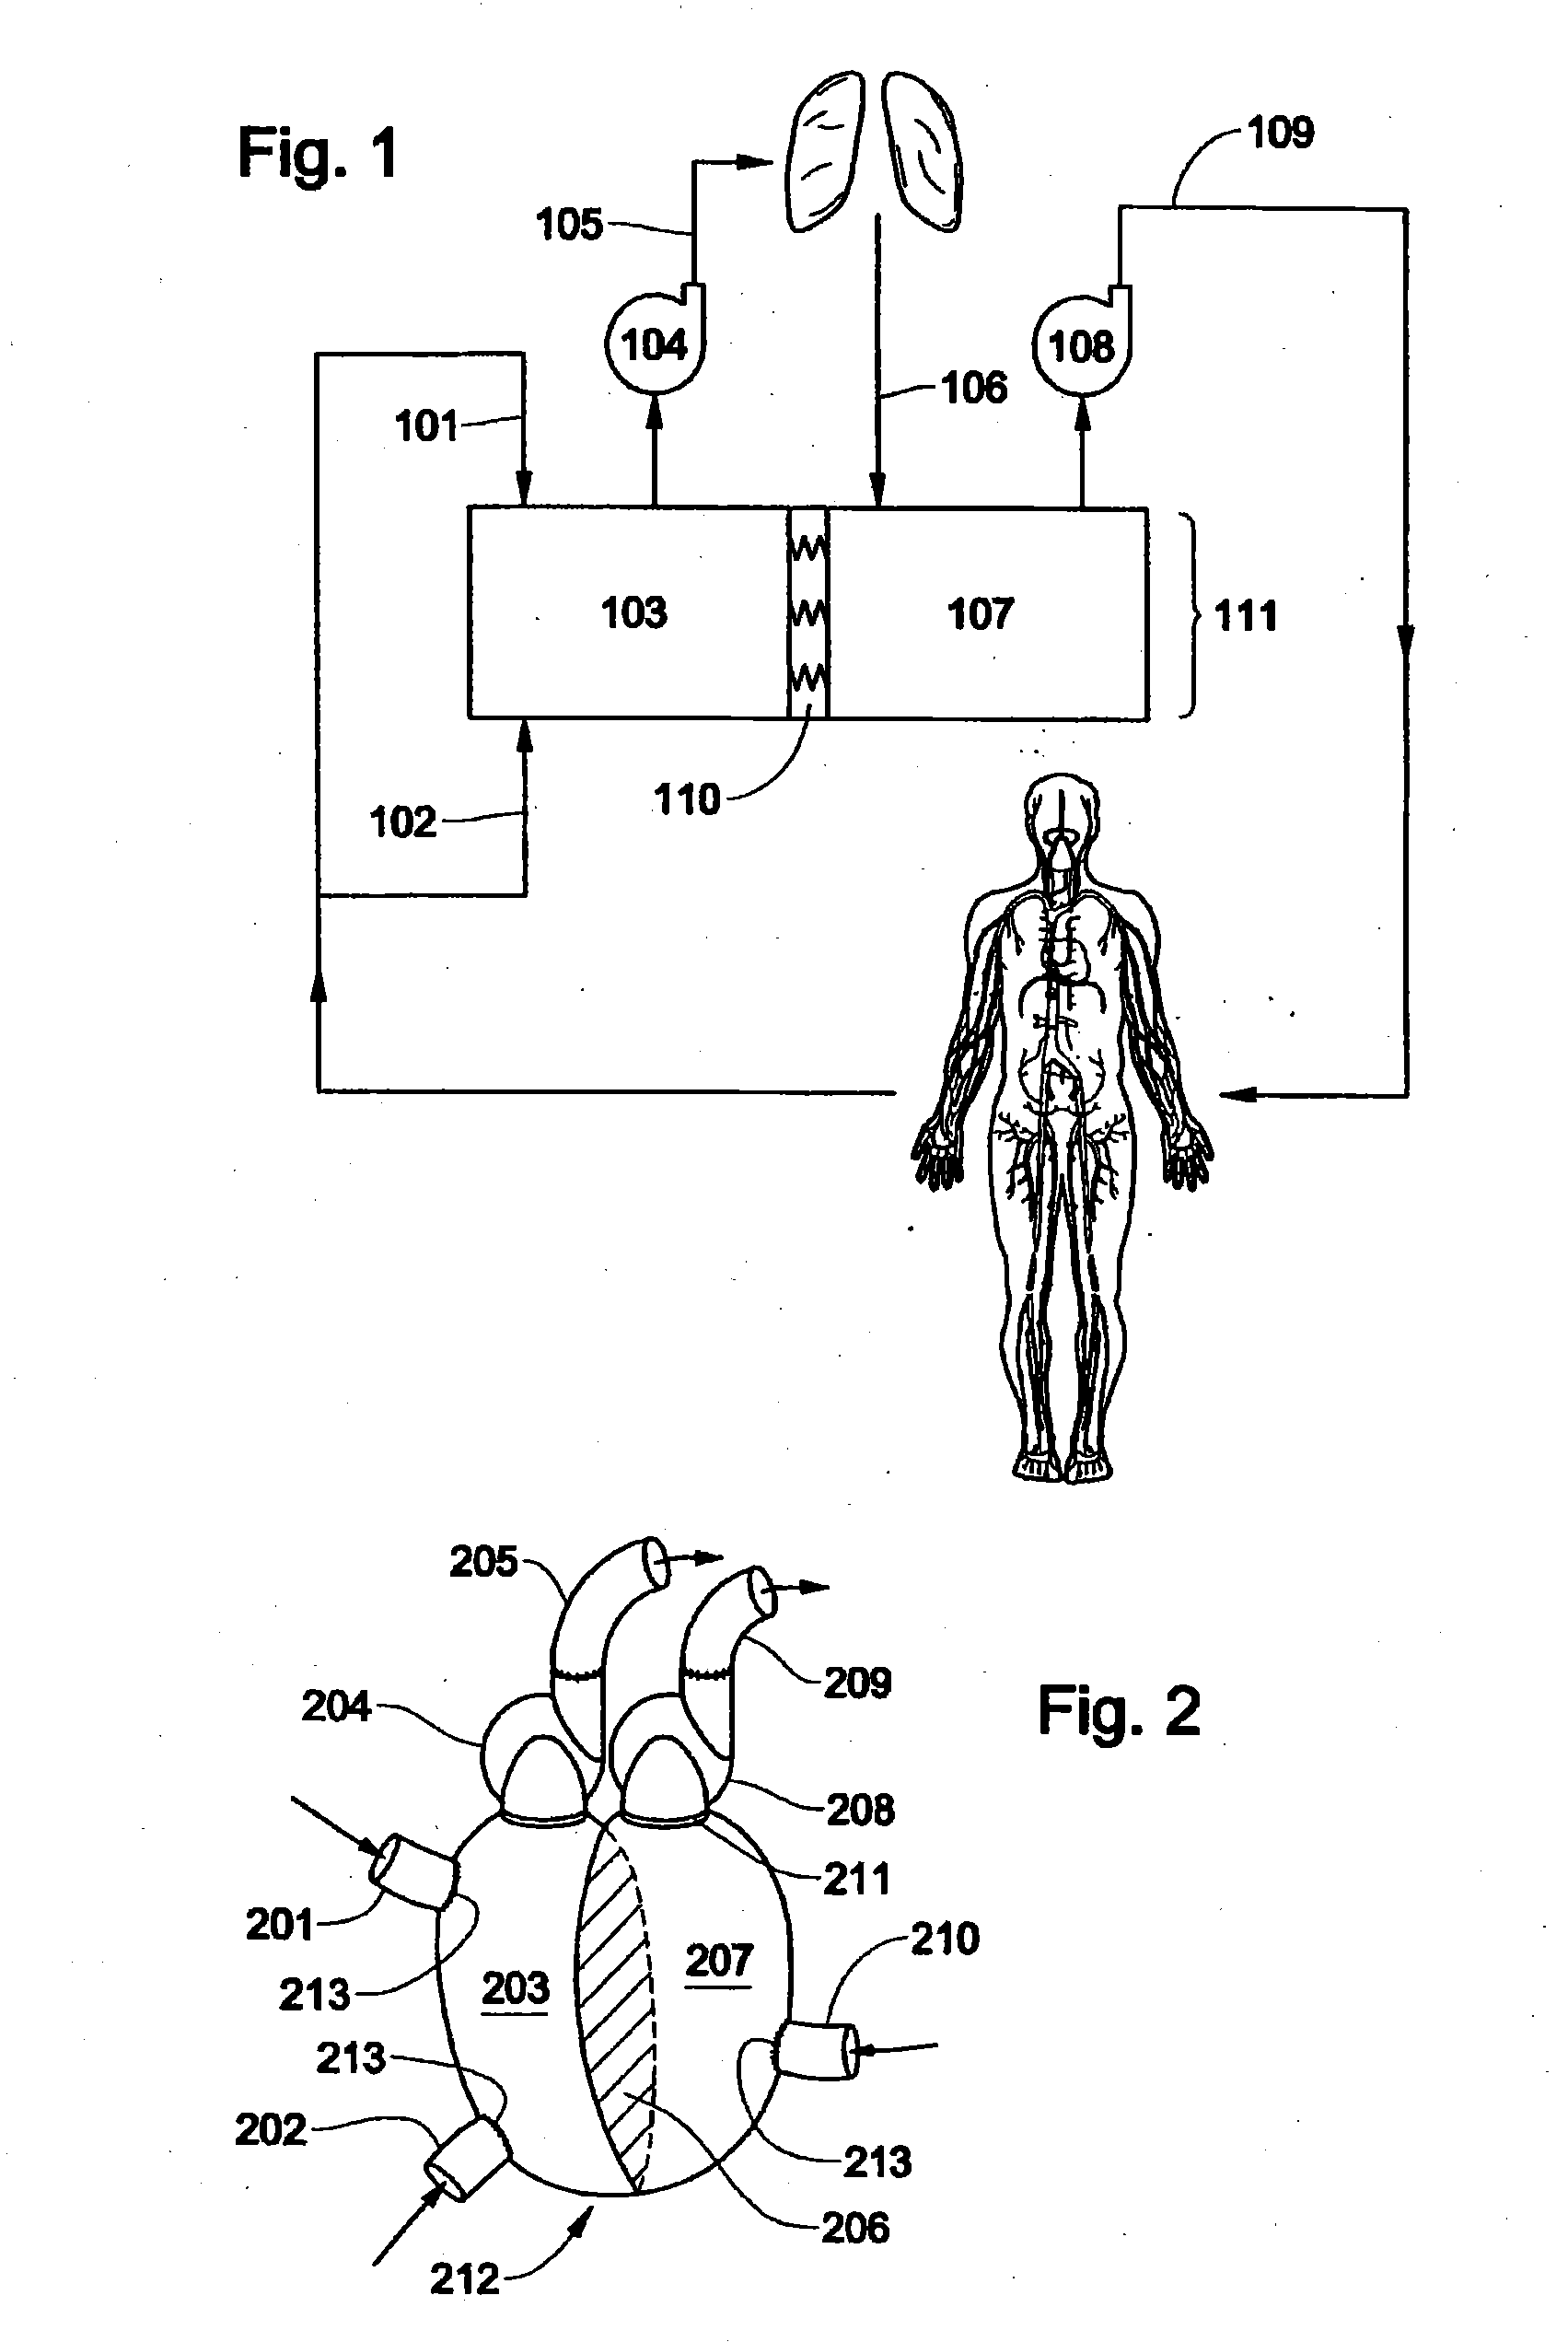 Total Artificial Heart System For Auto-Regulating Flow And Pressure Balance